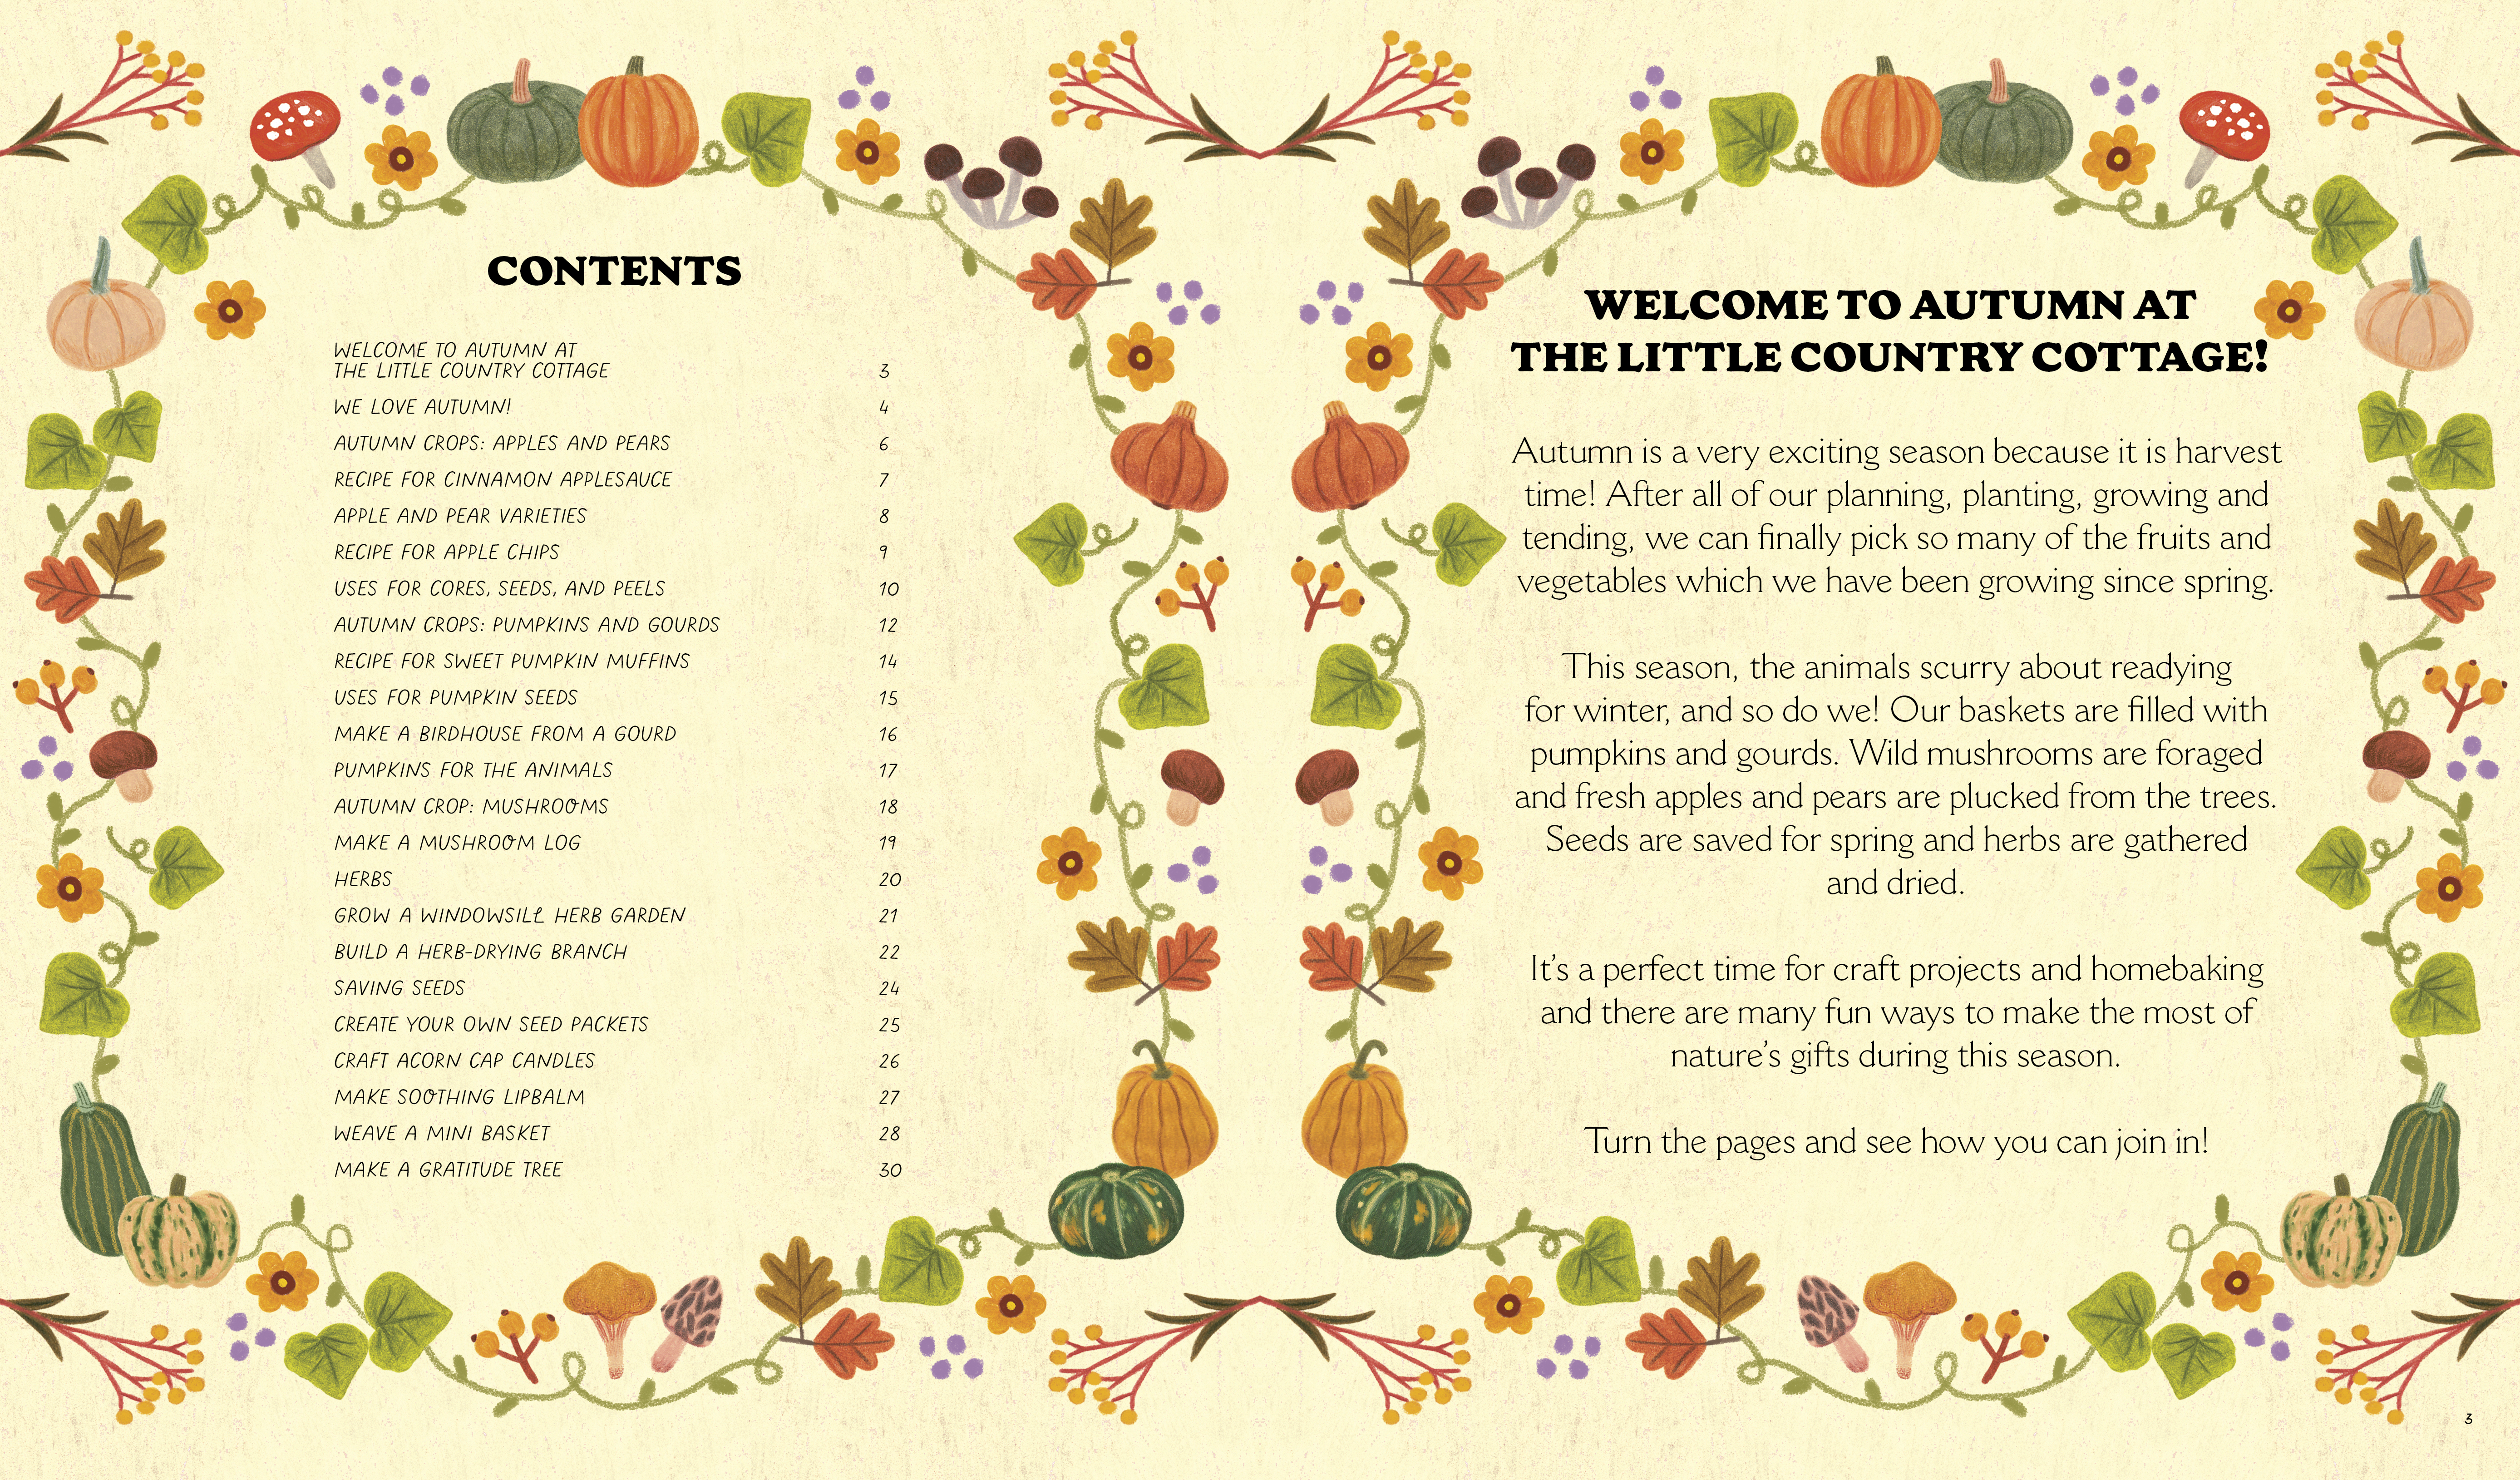 Little Country Cottage: An Autumn Treasury of Recipes, Crafts and Wisdom